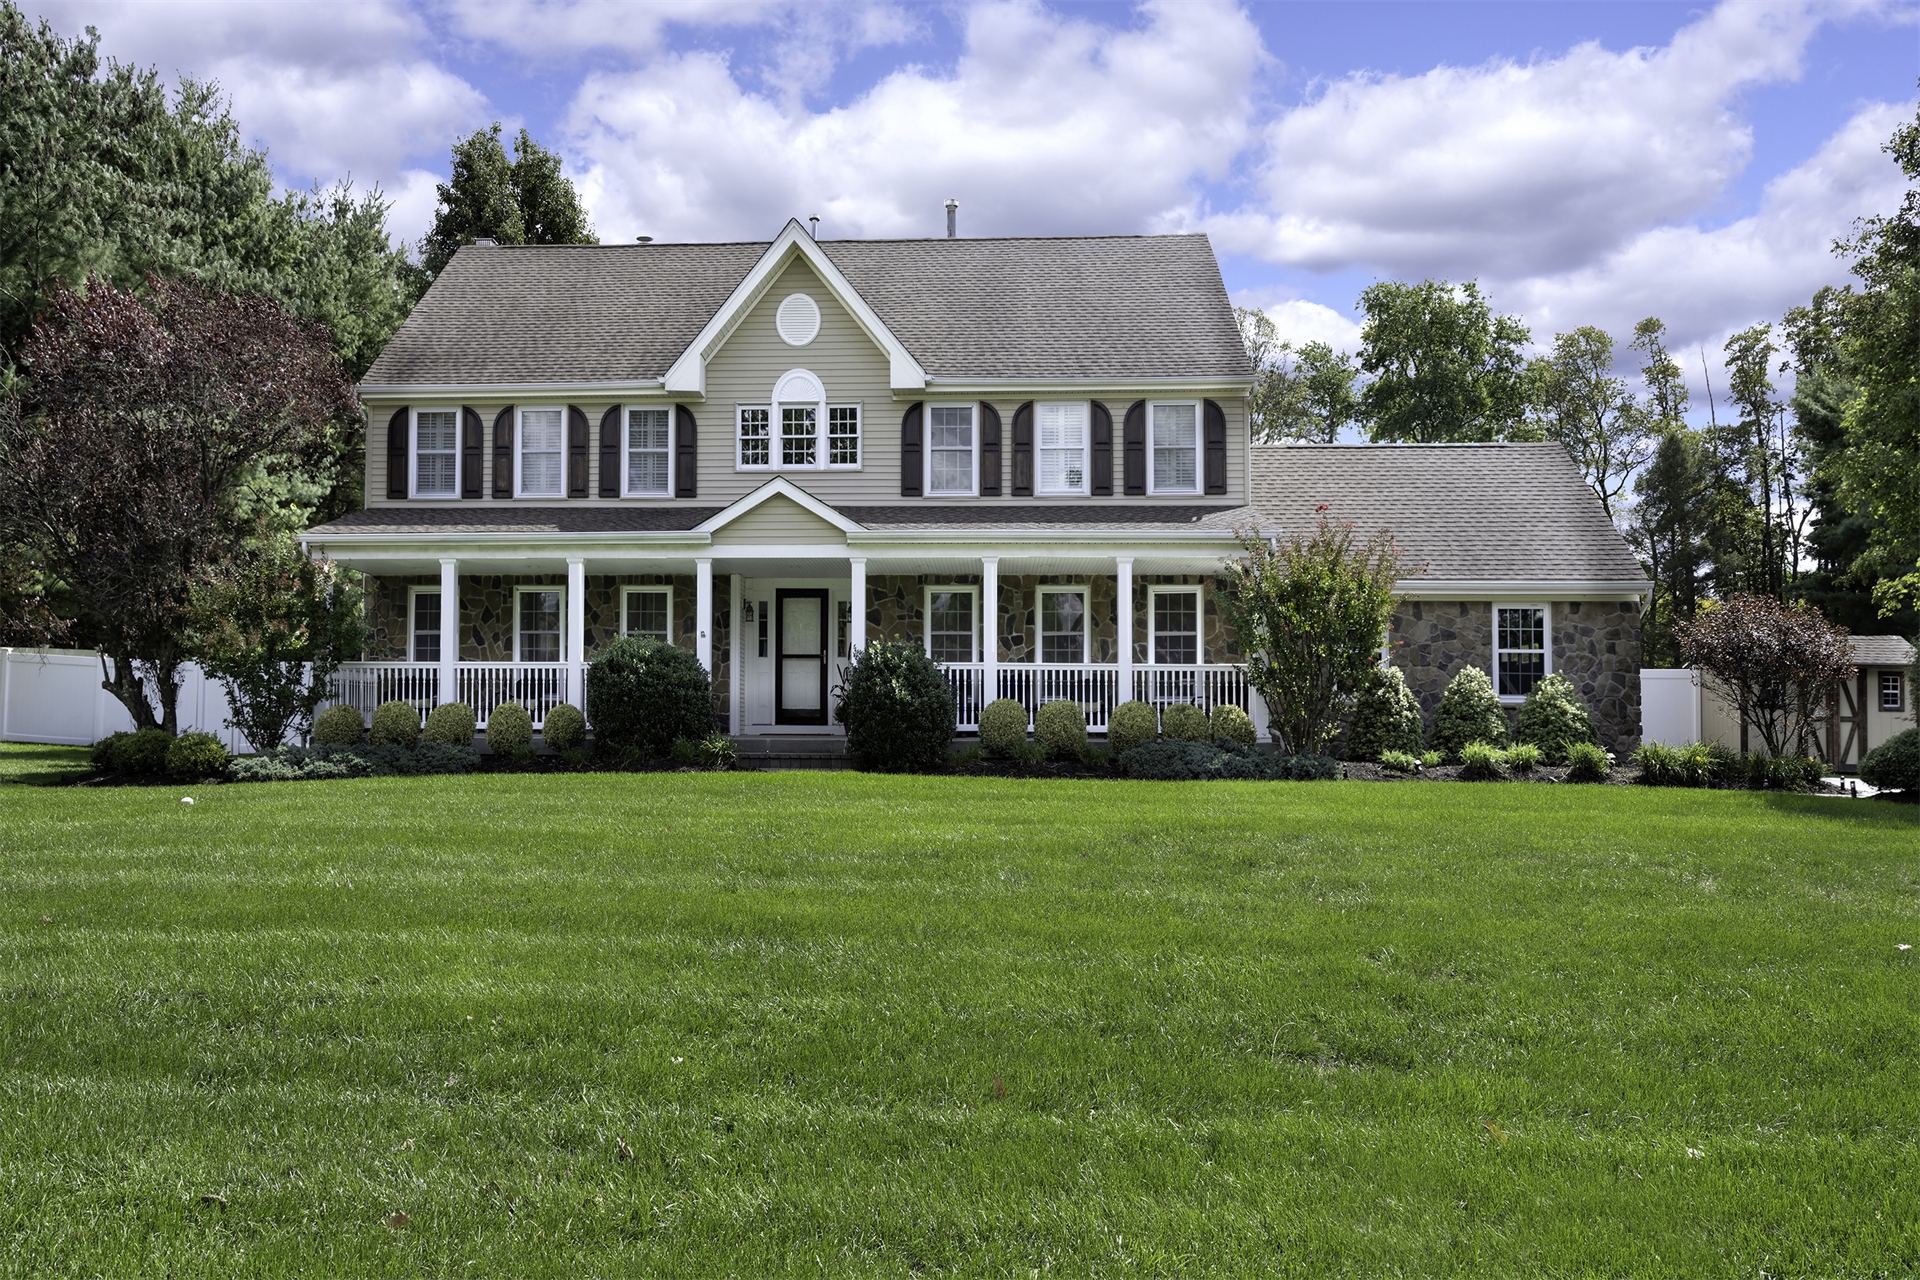 Single Family at Robbinsville, New Jersey United States